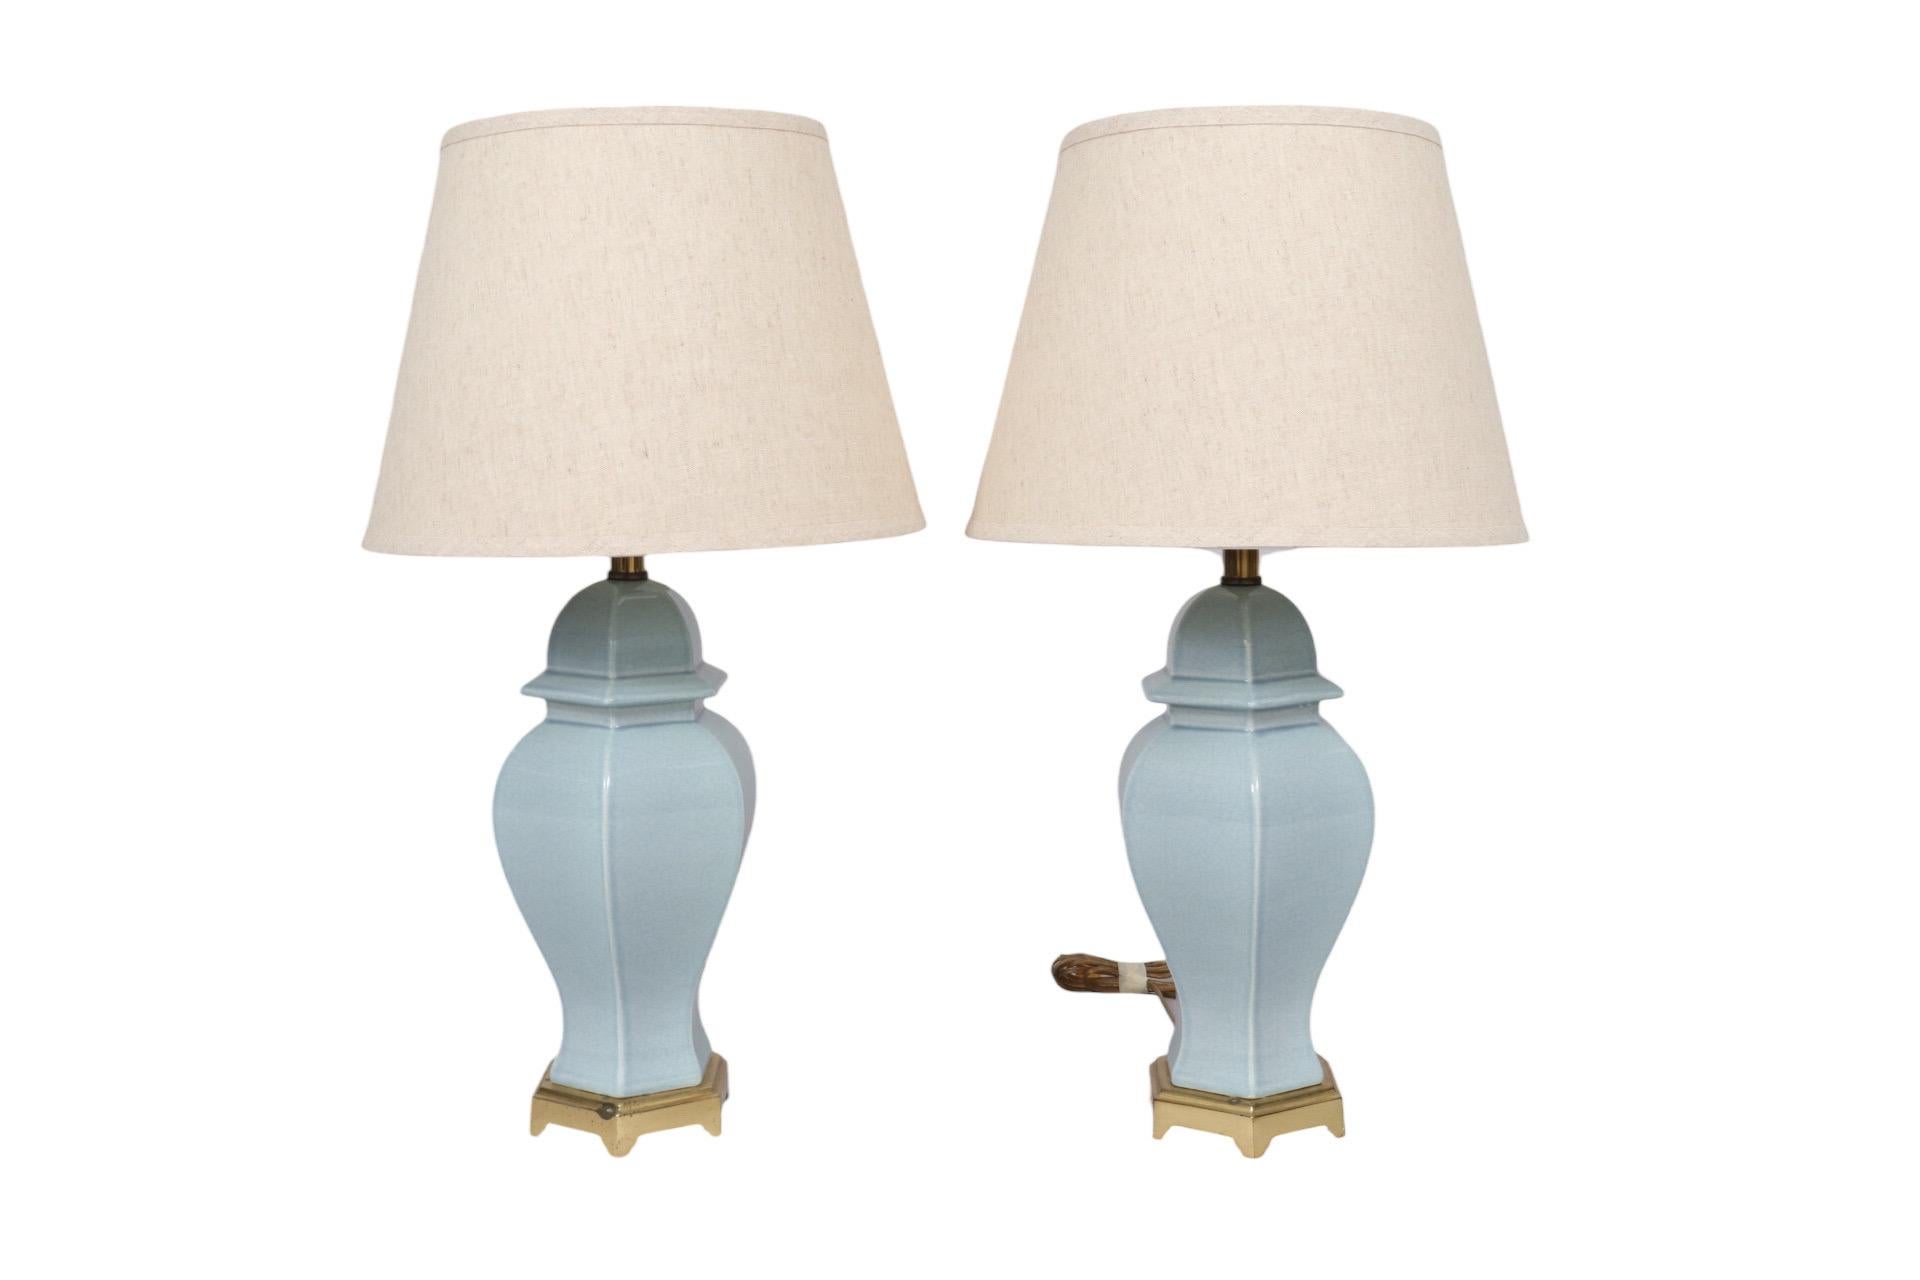 A pair of traditional ceramic table lamps. Cast with a hexagonal body and a beveled cap finished in a baby blue craquelure glaze, set on a simple brass base. Empire cylinder shades are in an ecru linen. Each lamp measures 7